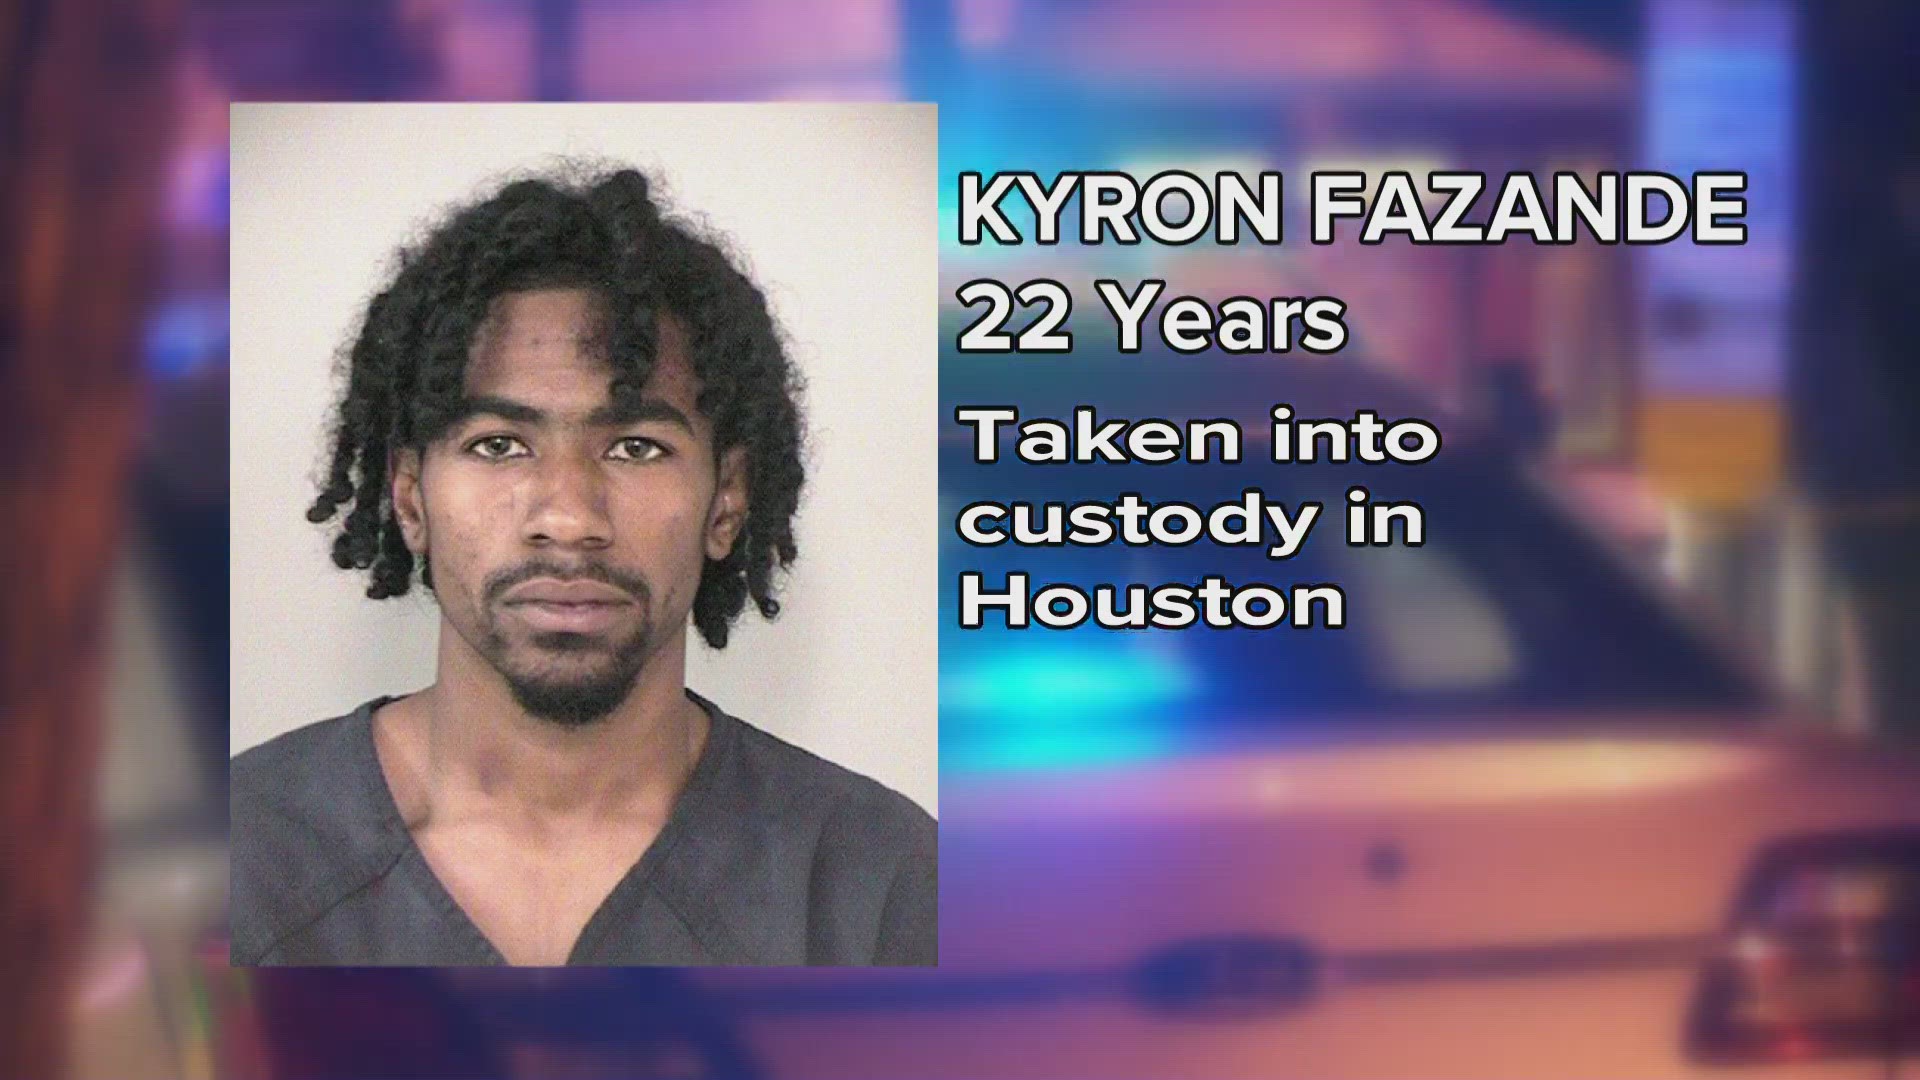 The 22-year-old was taken into custody at a home in Houston and will be extradited to New Orleans.